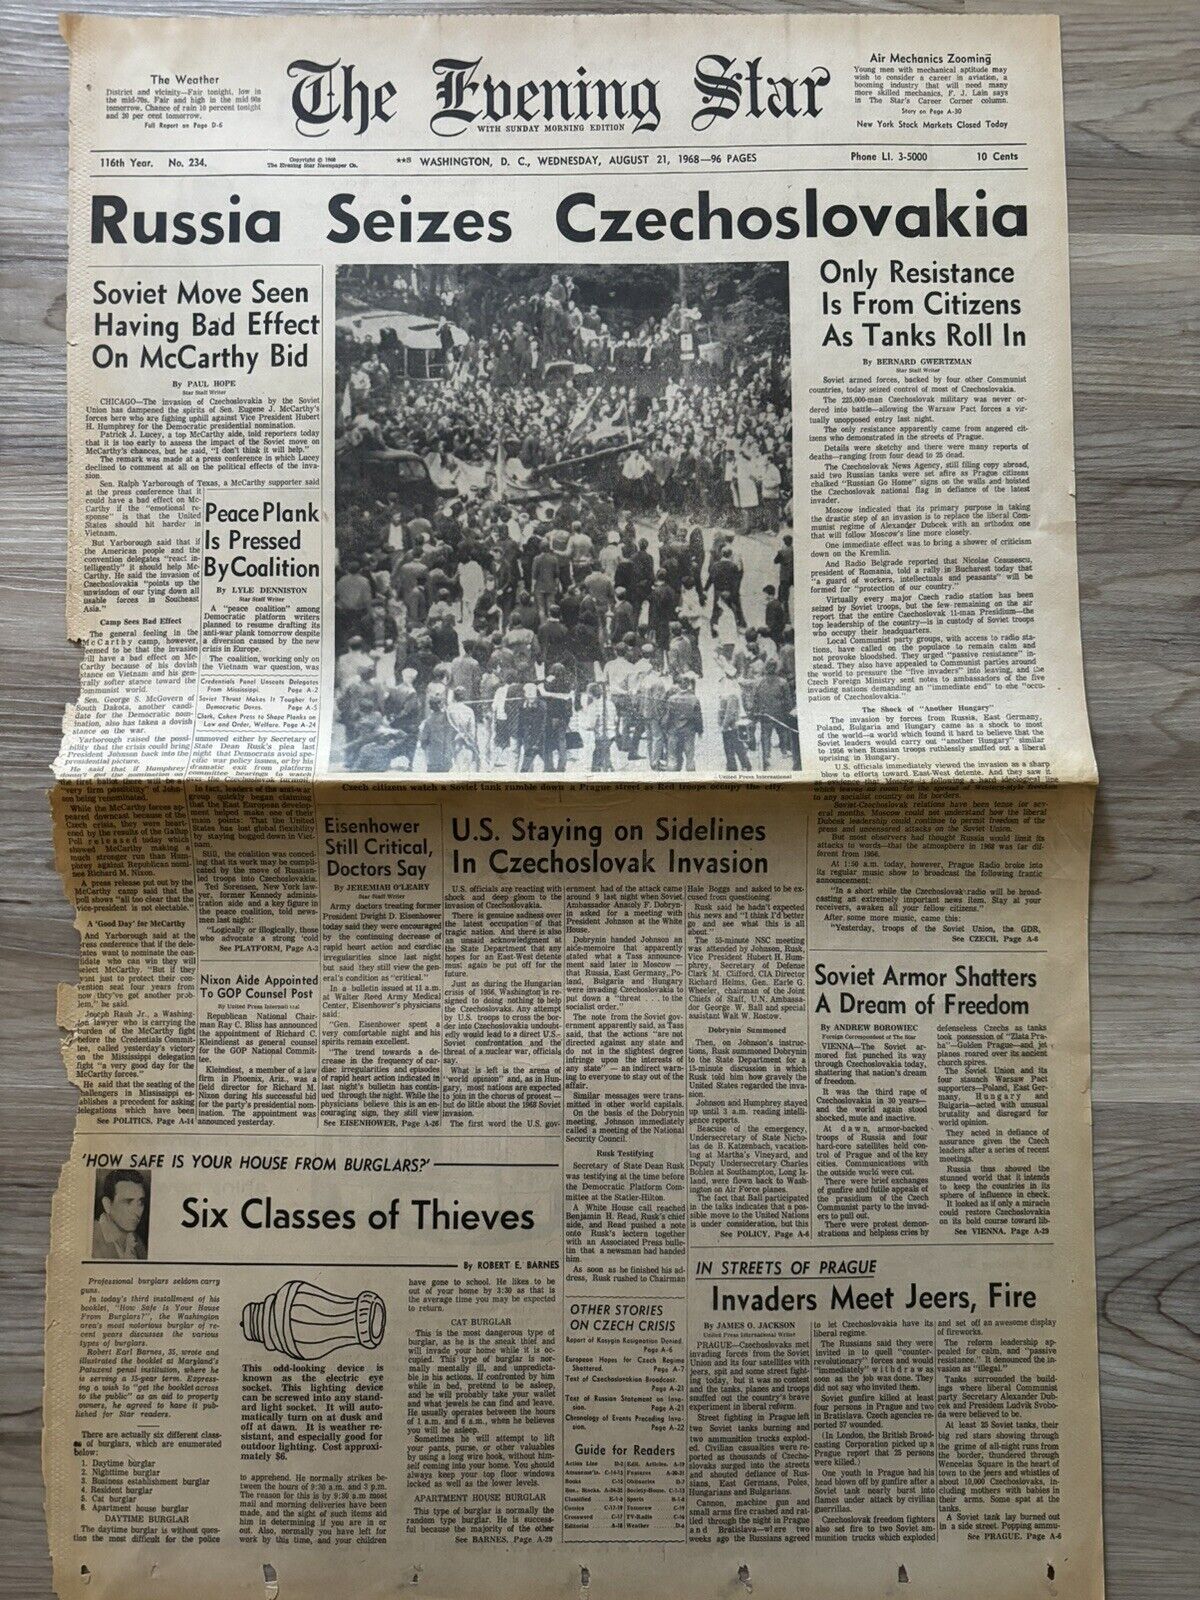 “Russia Seizes Czechoslovakia” The historic Evening Star (August 1968)